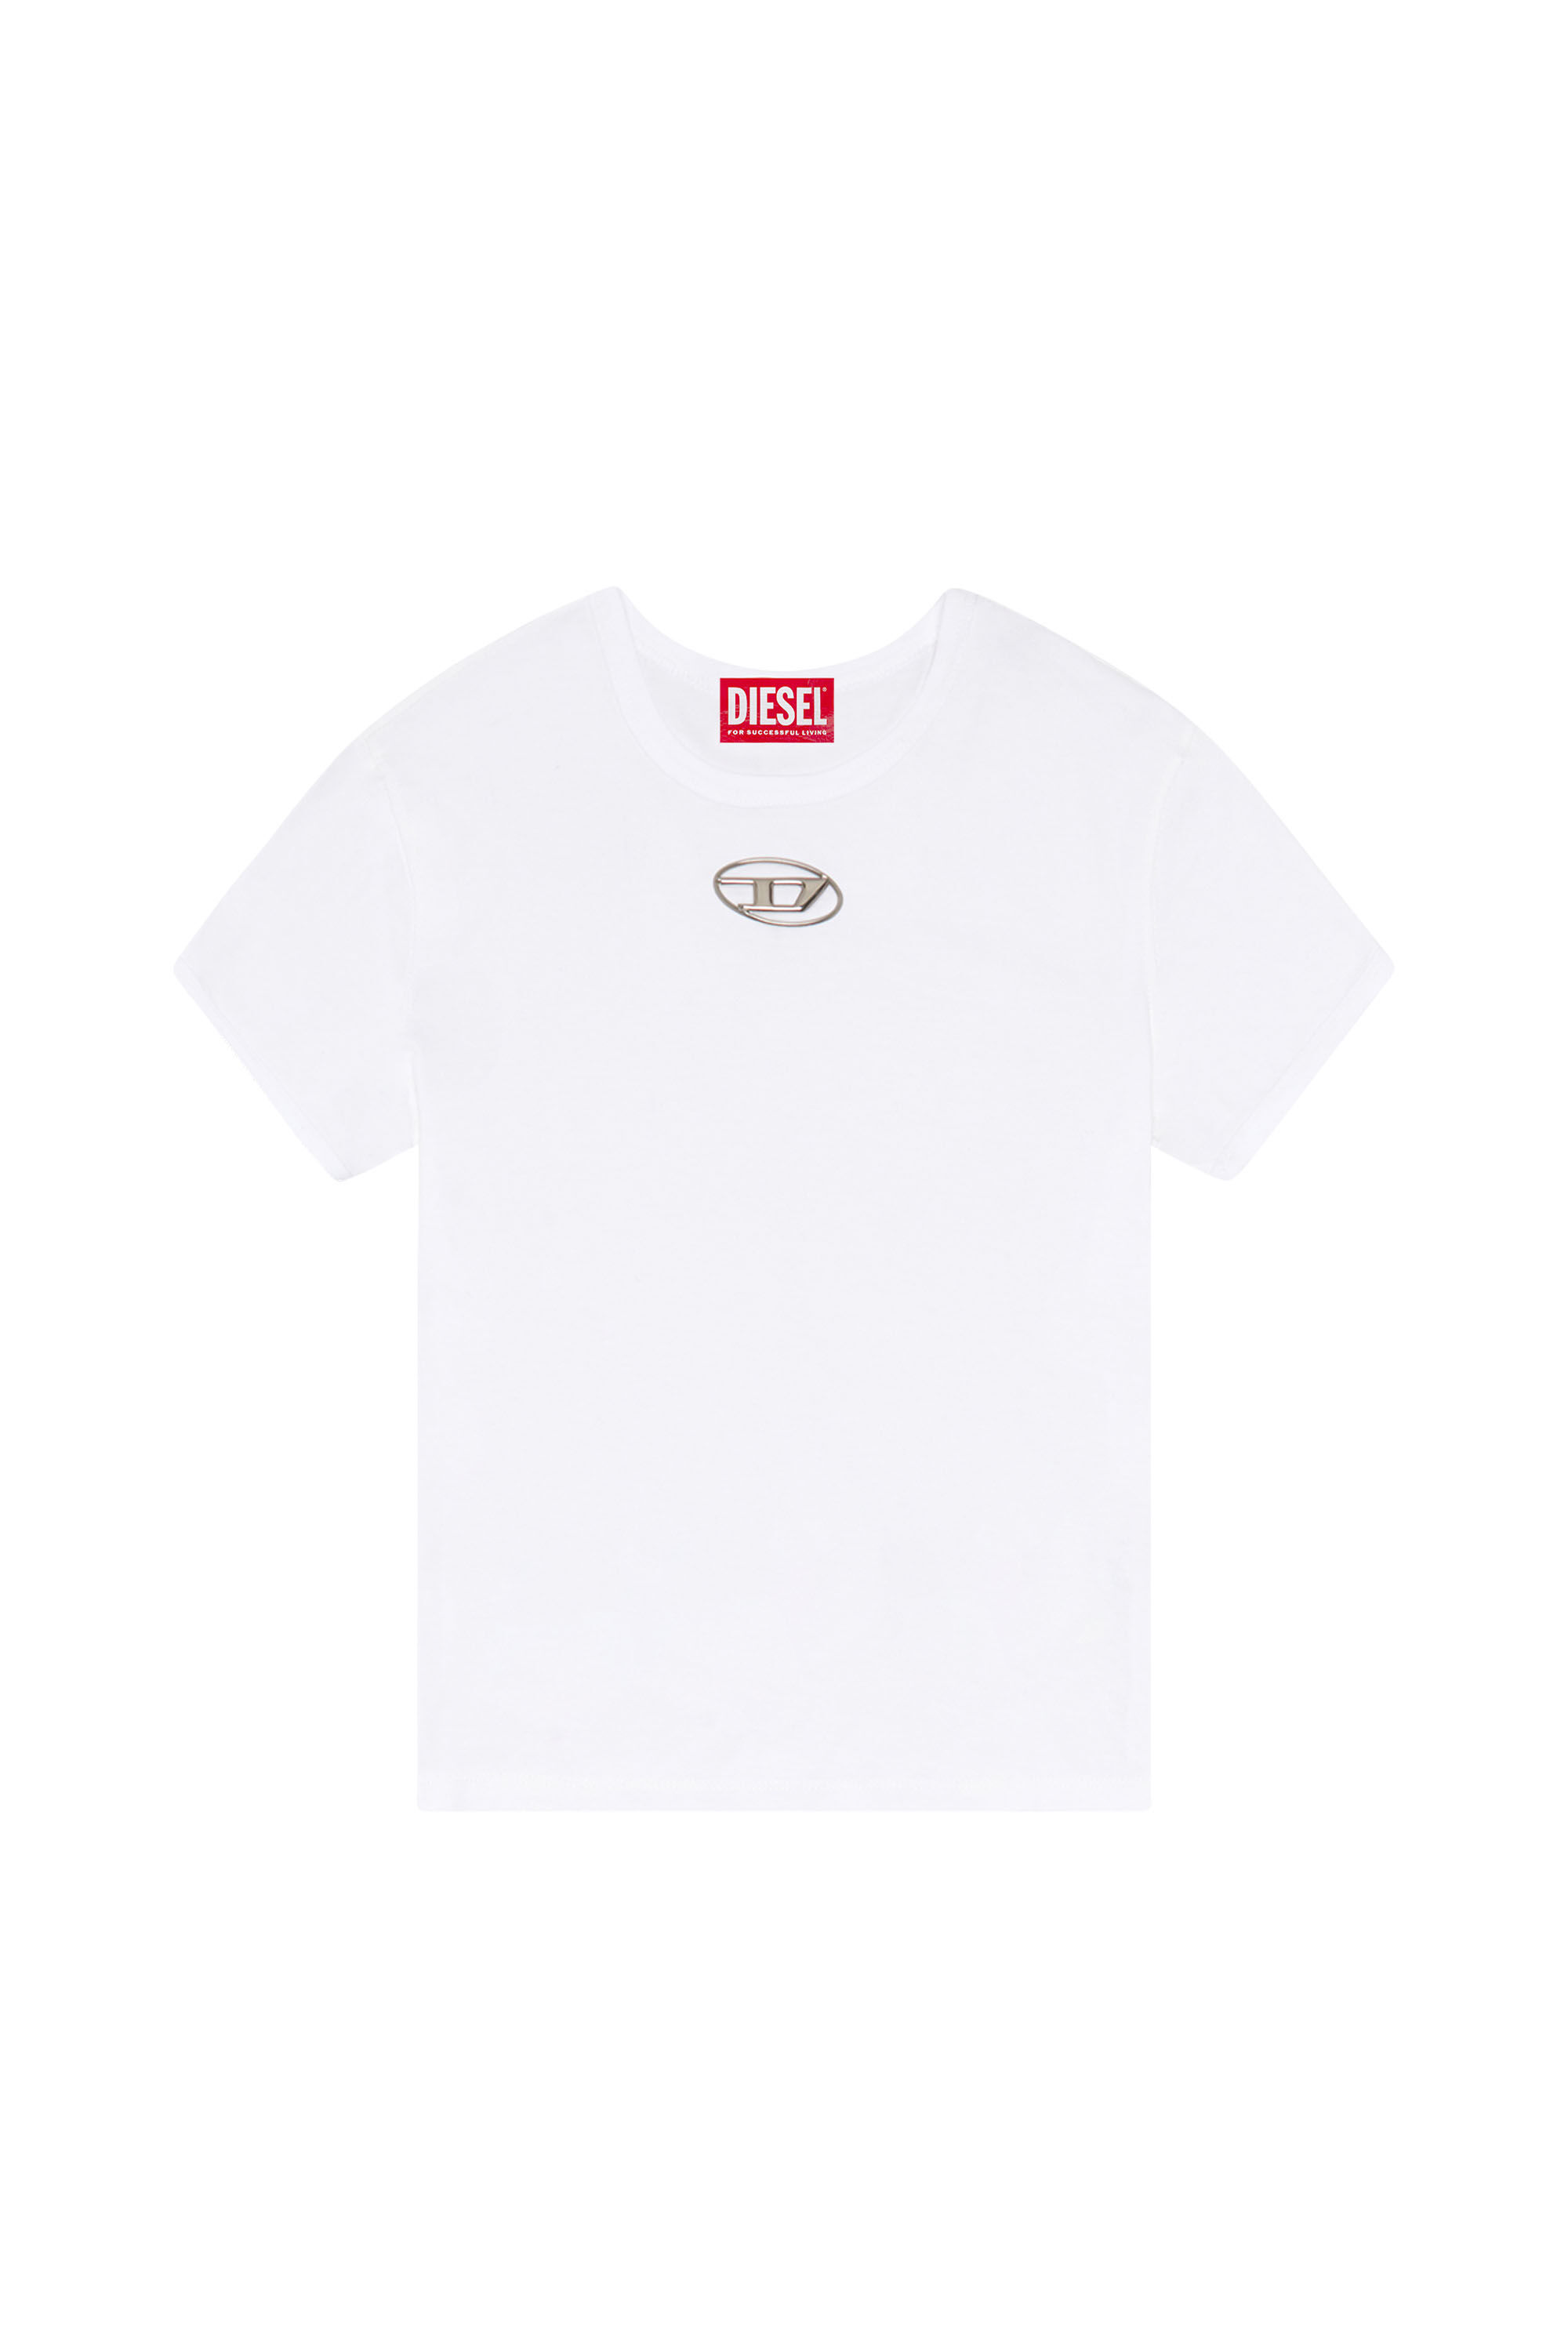 T-UNCUTIE-LONG-OD T-shirt with injection-moulded Oval D｜ホワイト ...